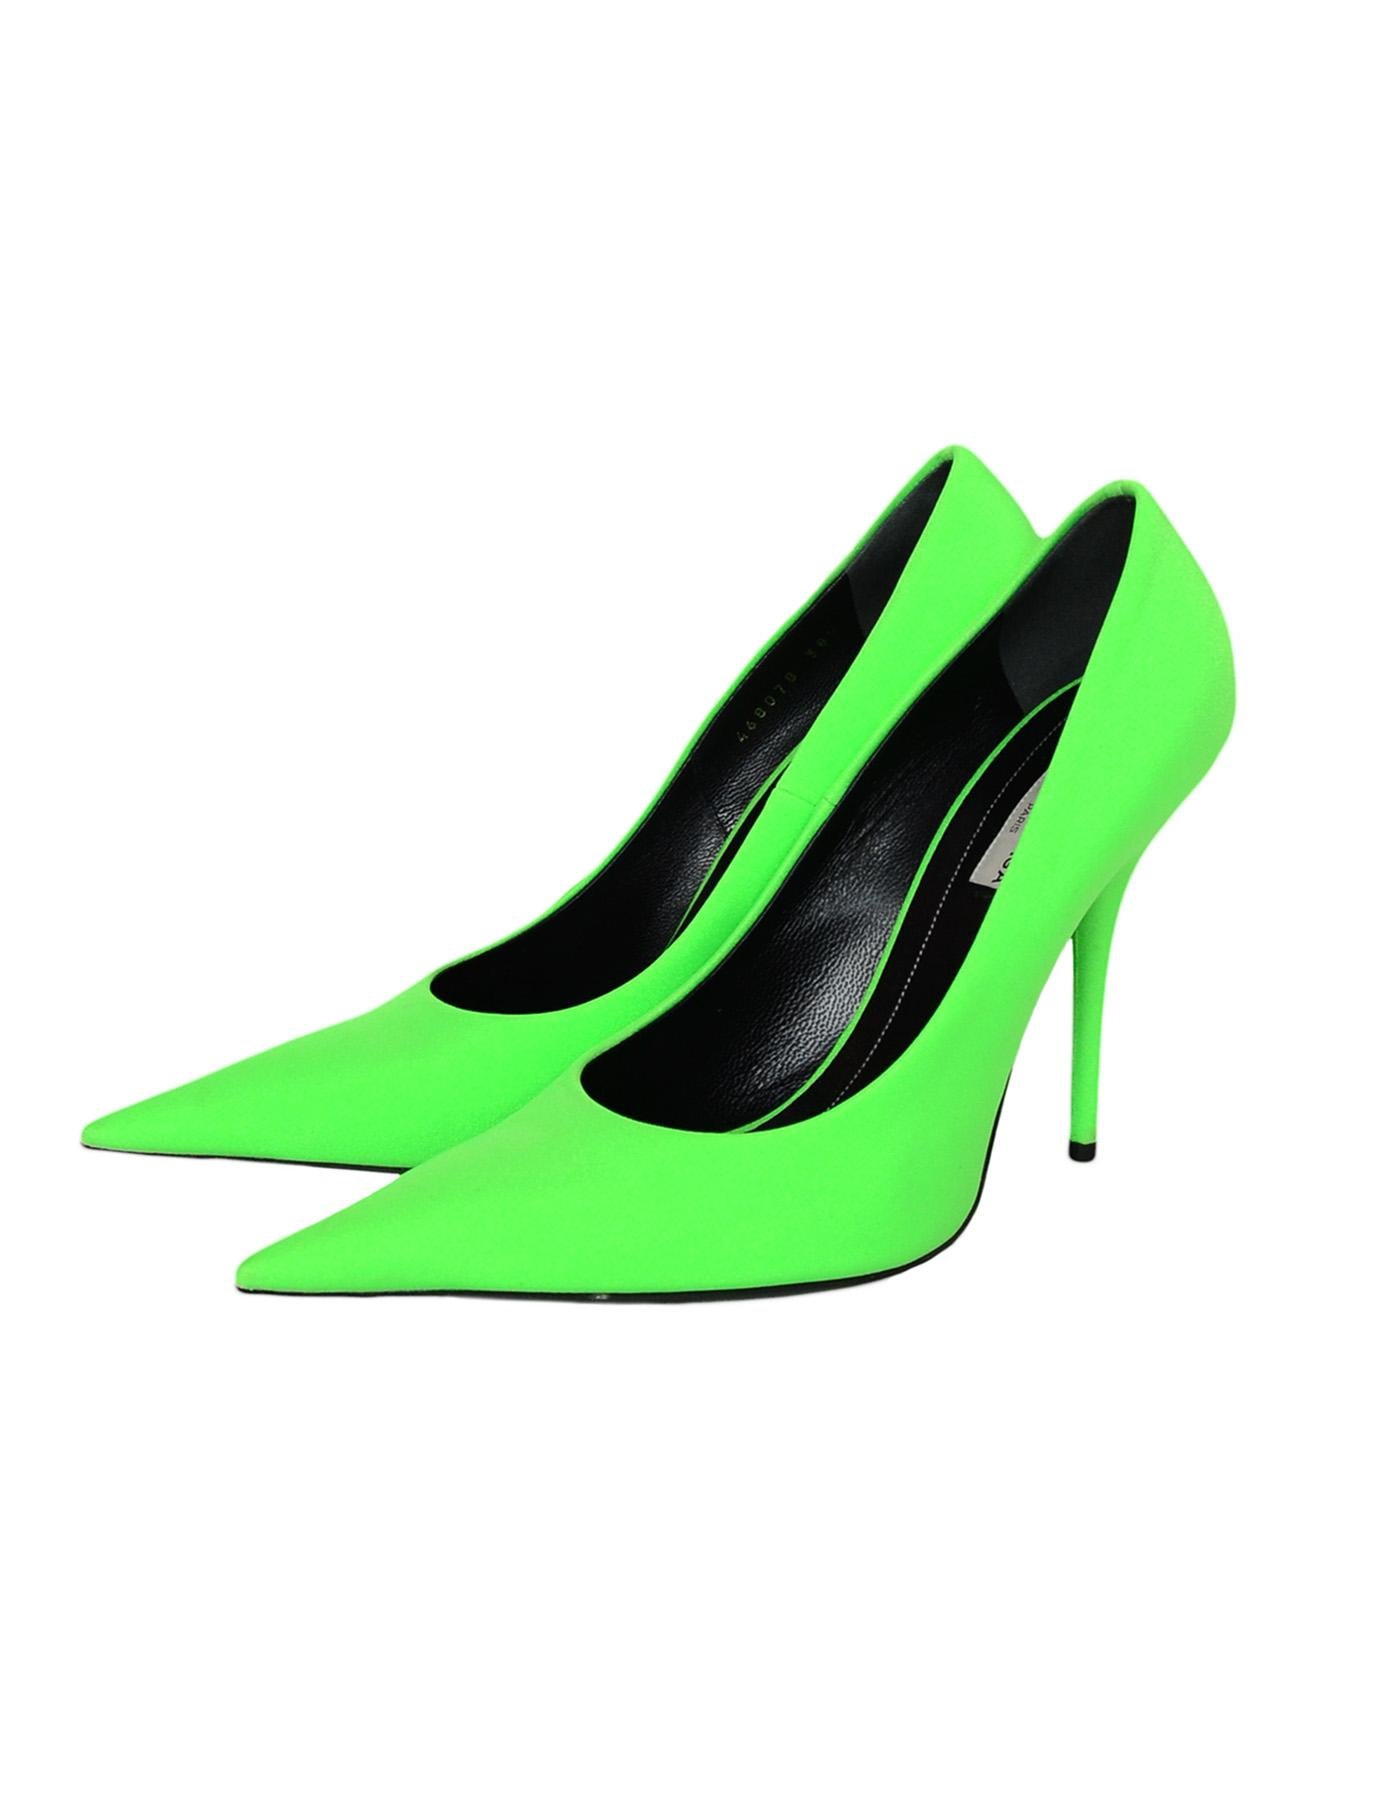 Balenciaga Neon Green Extreme Point Toe Knife Pumps

Made In: Italy
Color: Neon green
Materials: Spandex-80% Polyamide, 20% Elastan
Closure/Opening: Slide on
Overall Condition: Excellent pre-owned condition with the exception of light wear to soles